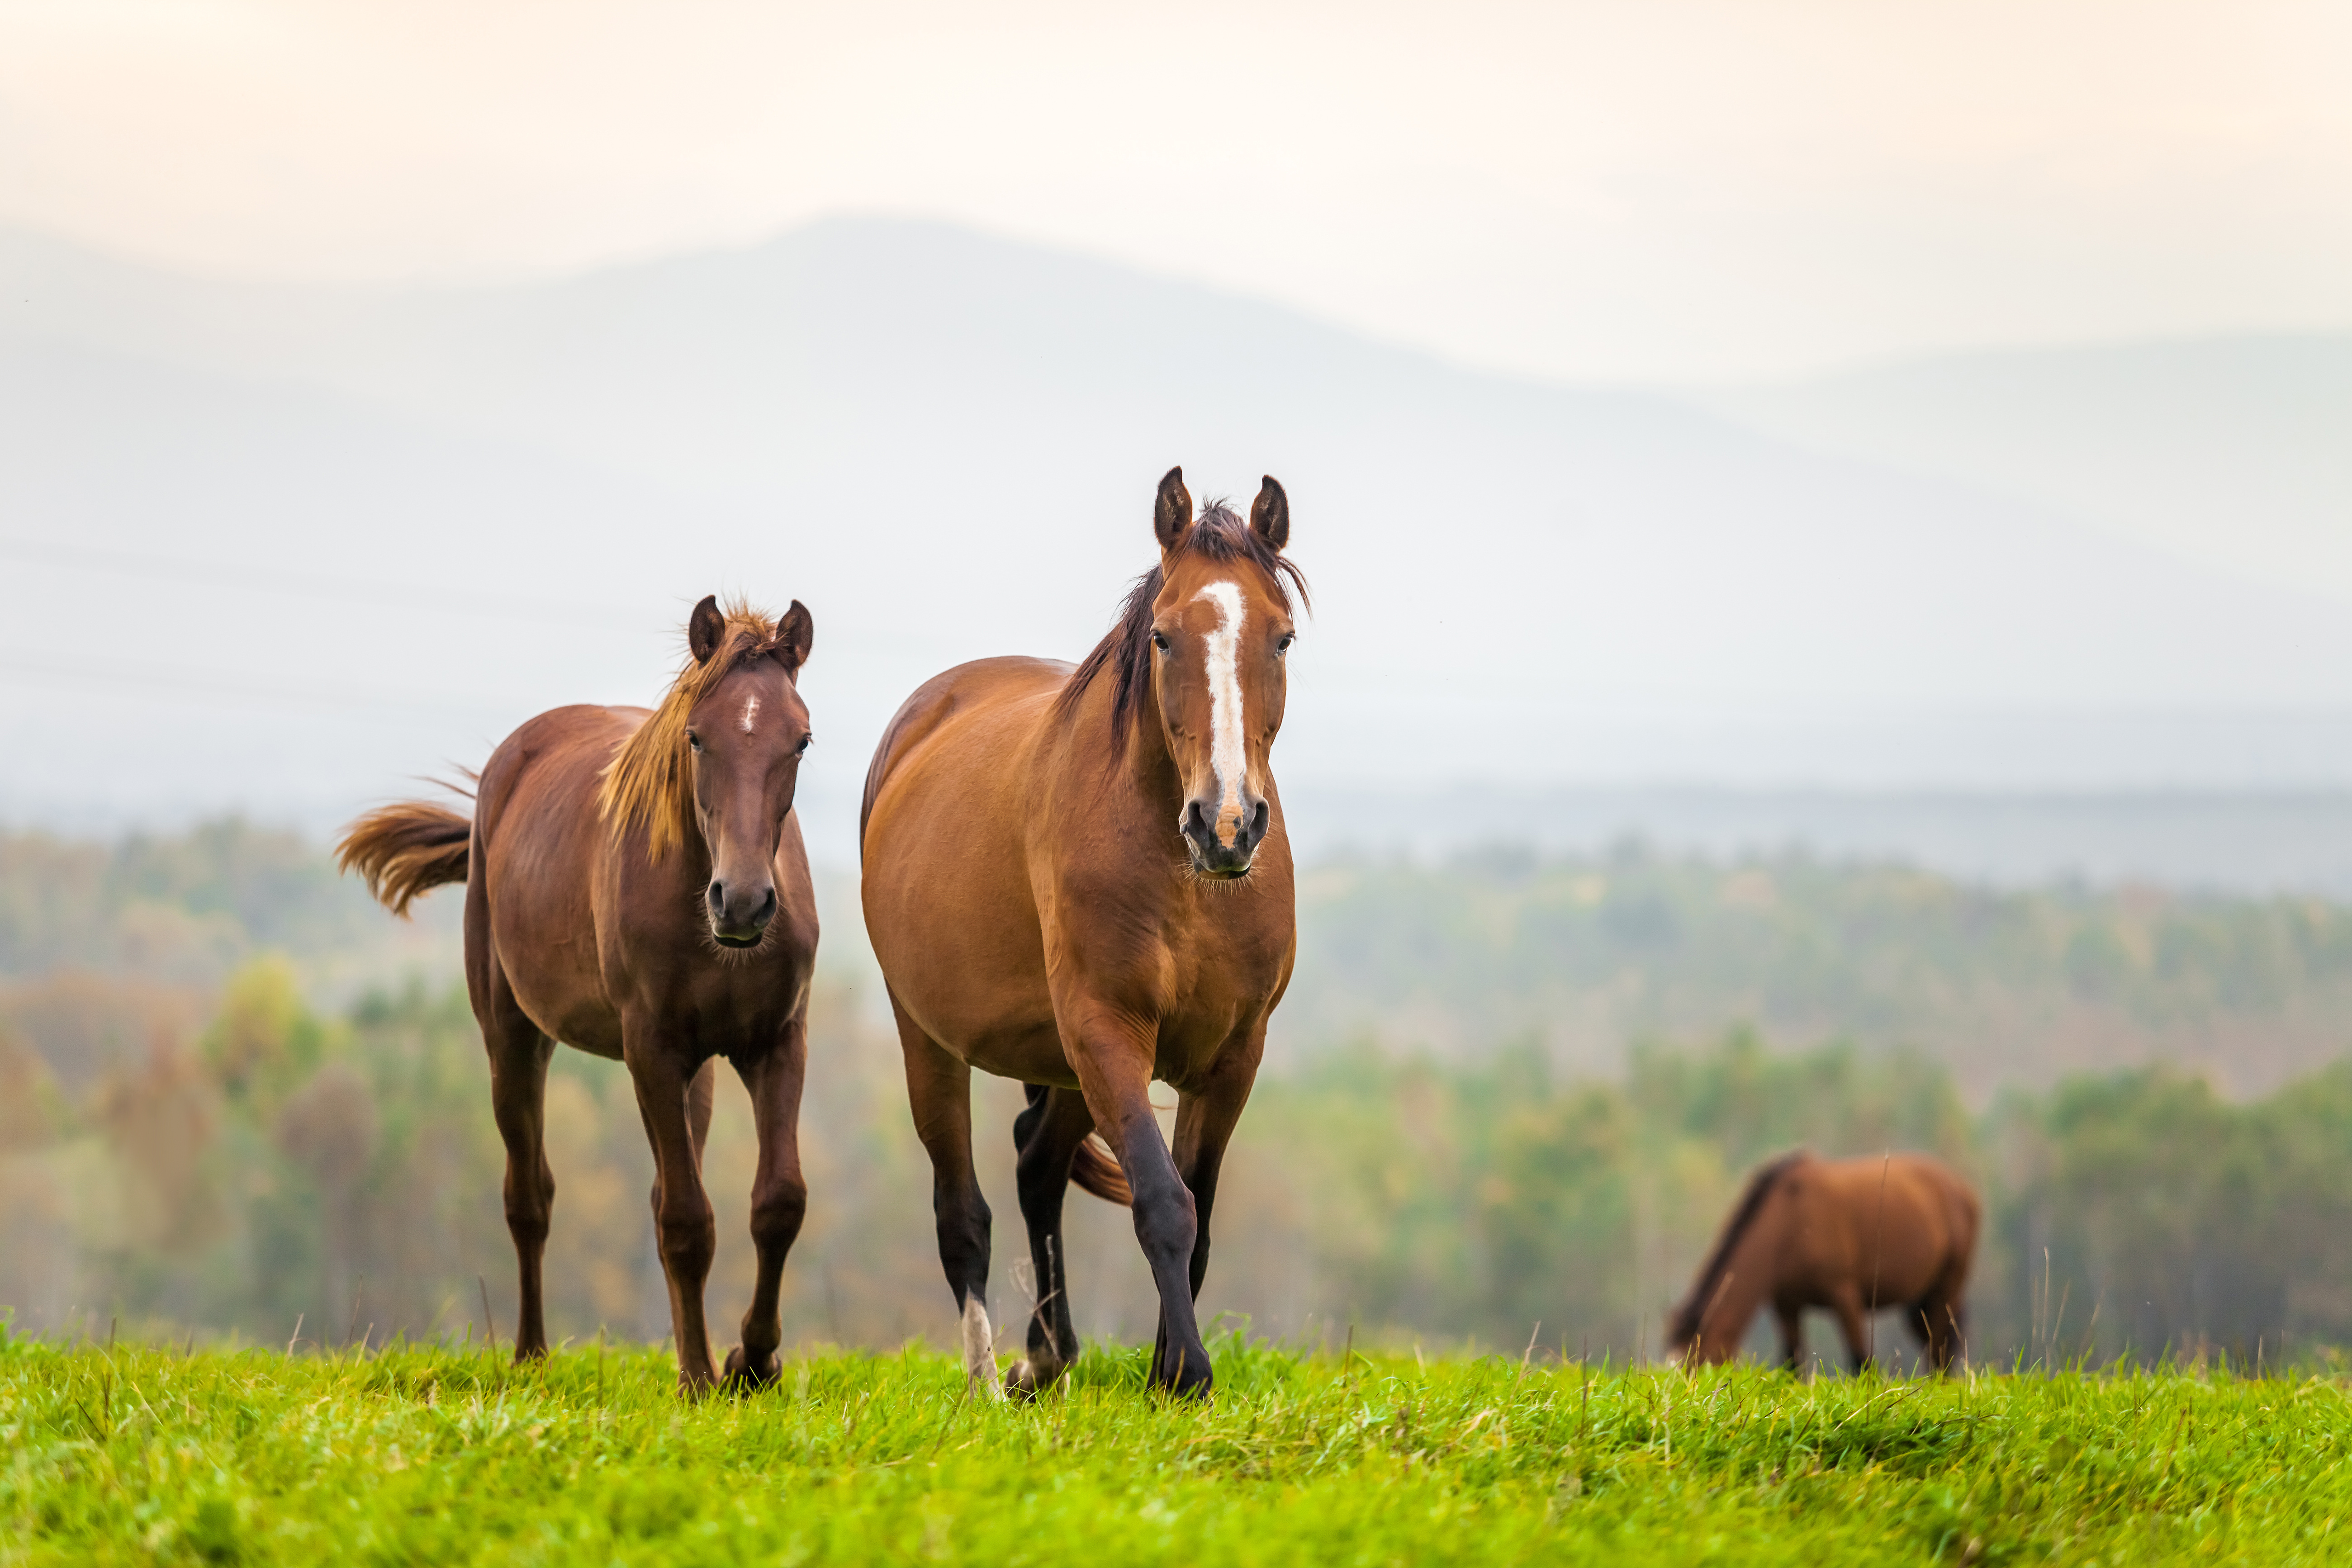 Two horses walking through a field 